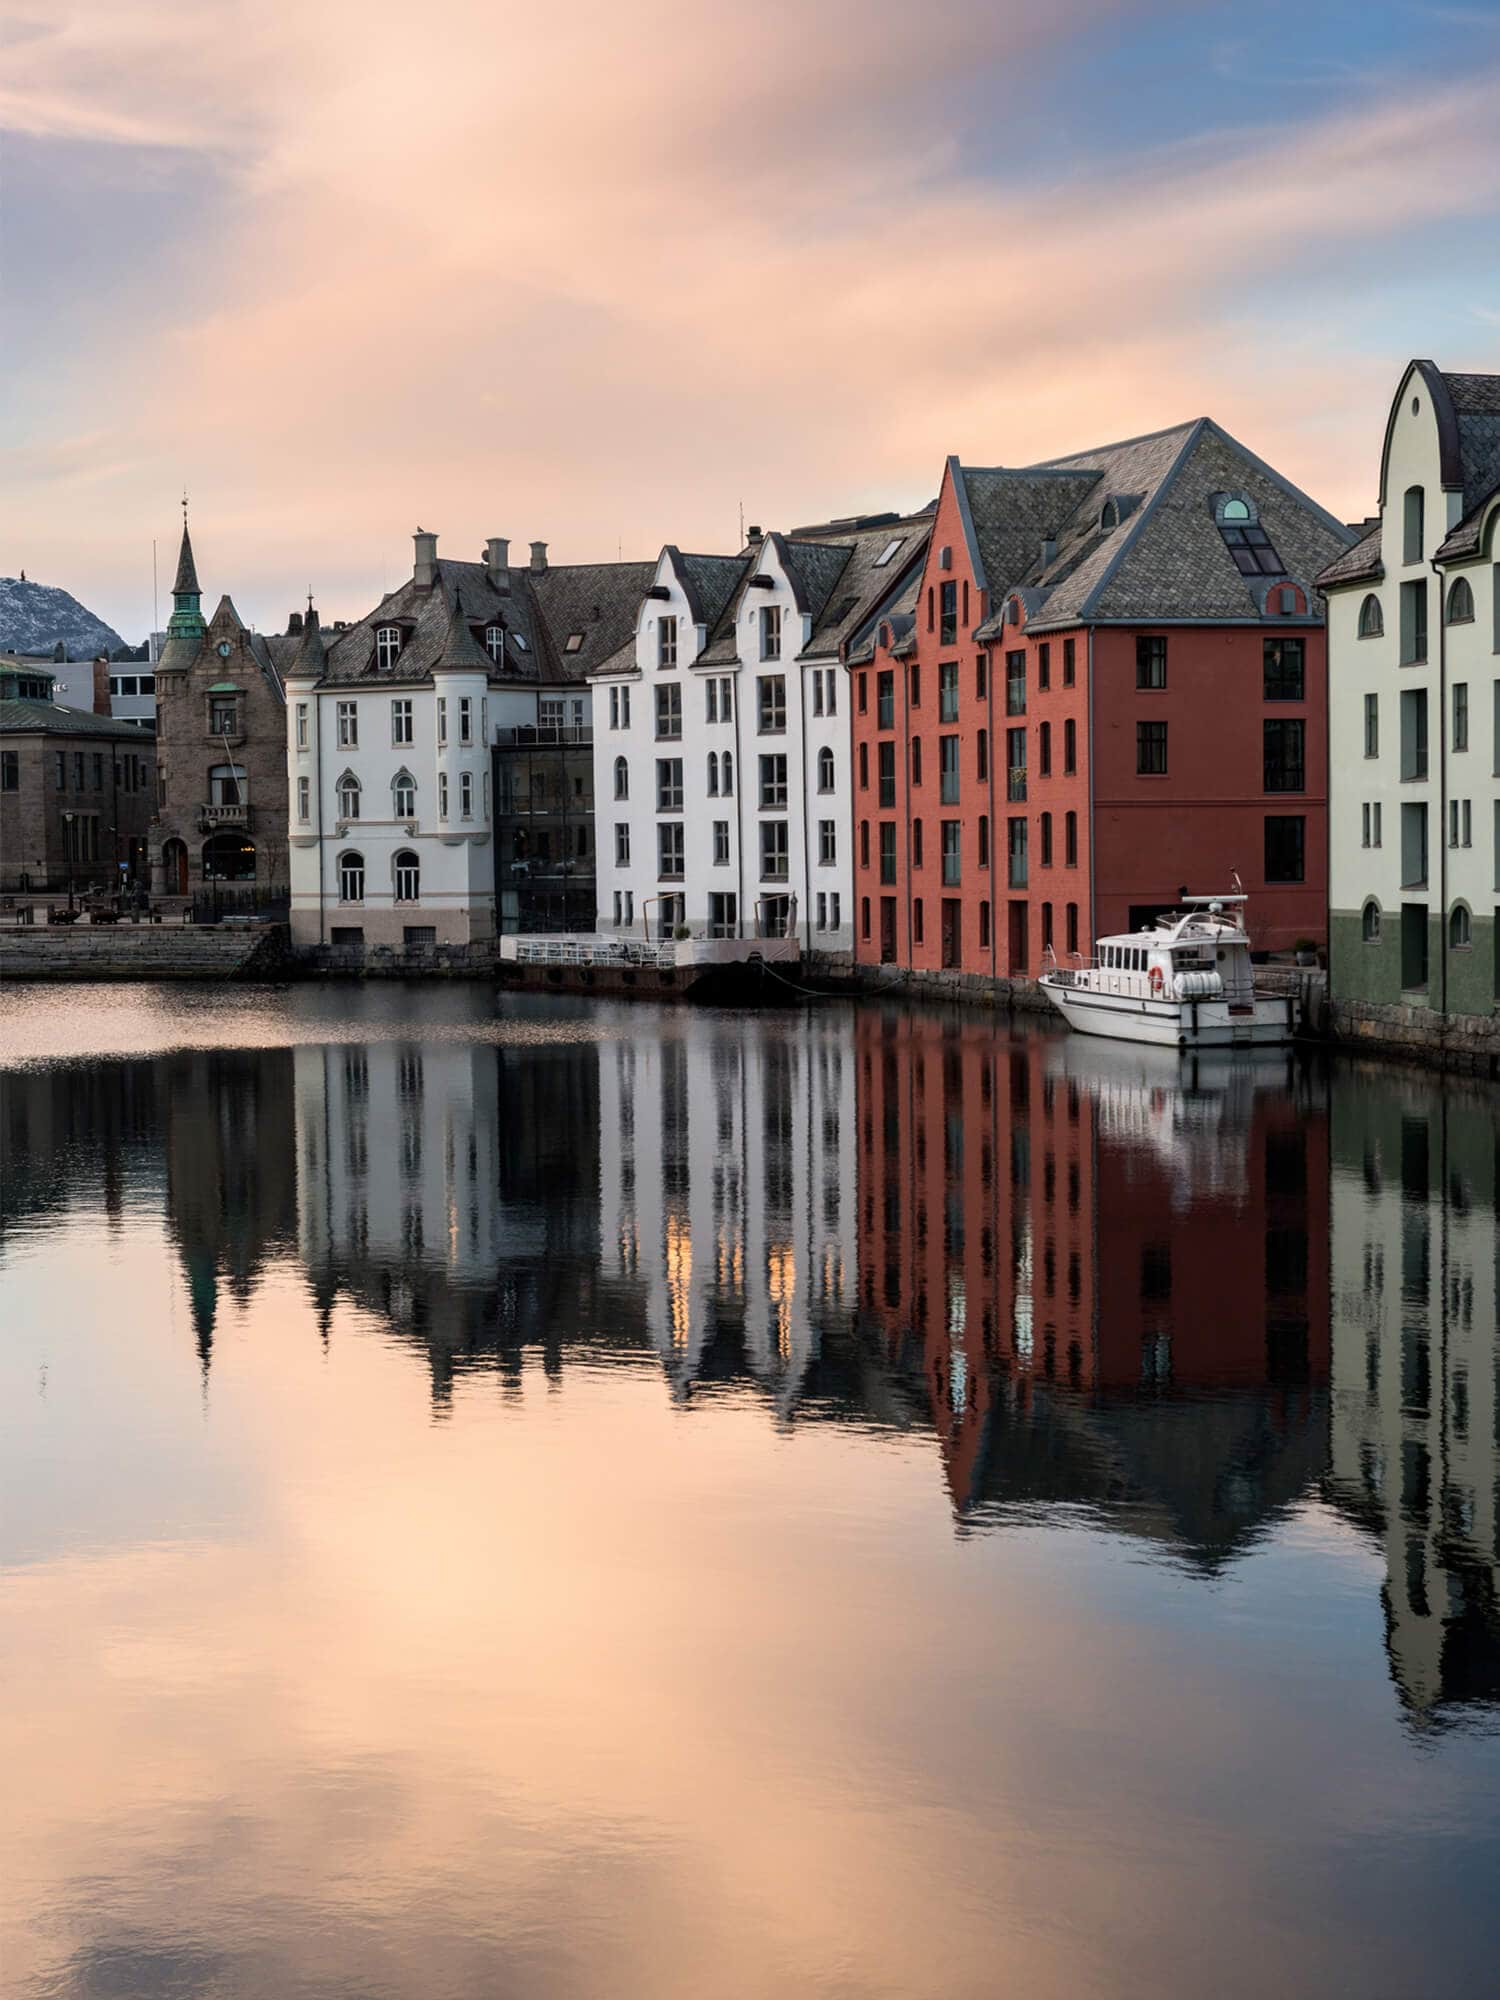 Top things to do in Norway - Art Nouveau architecture in Ålesund #norway #bucketlist